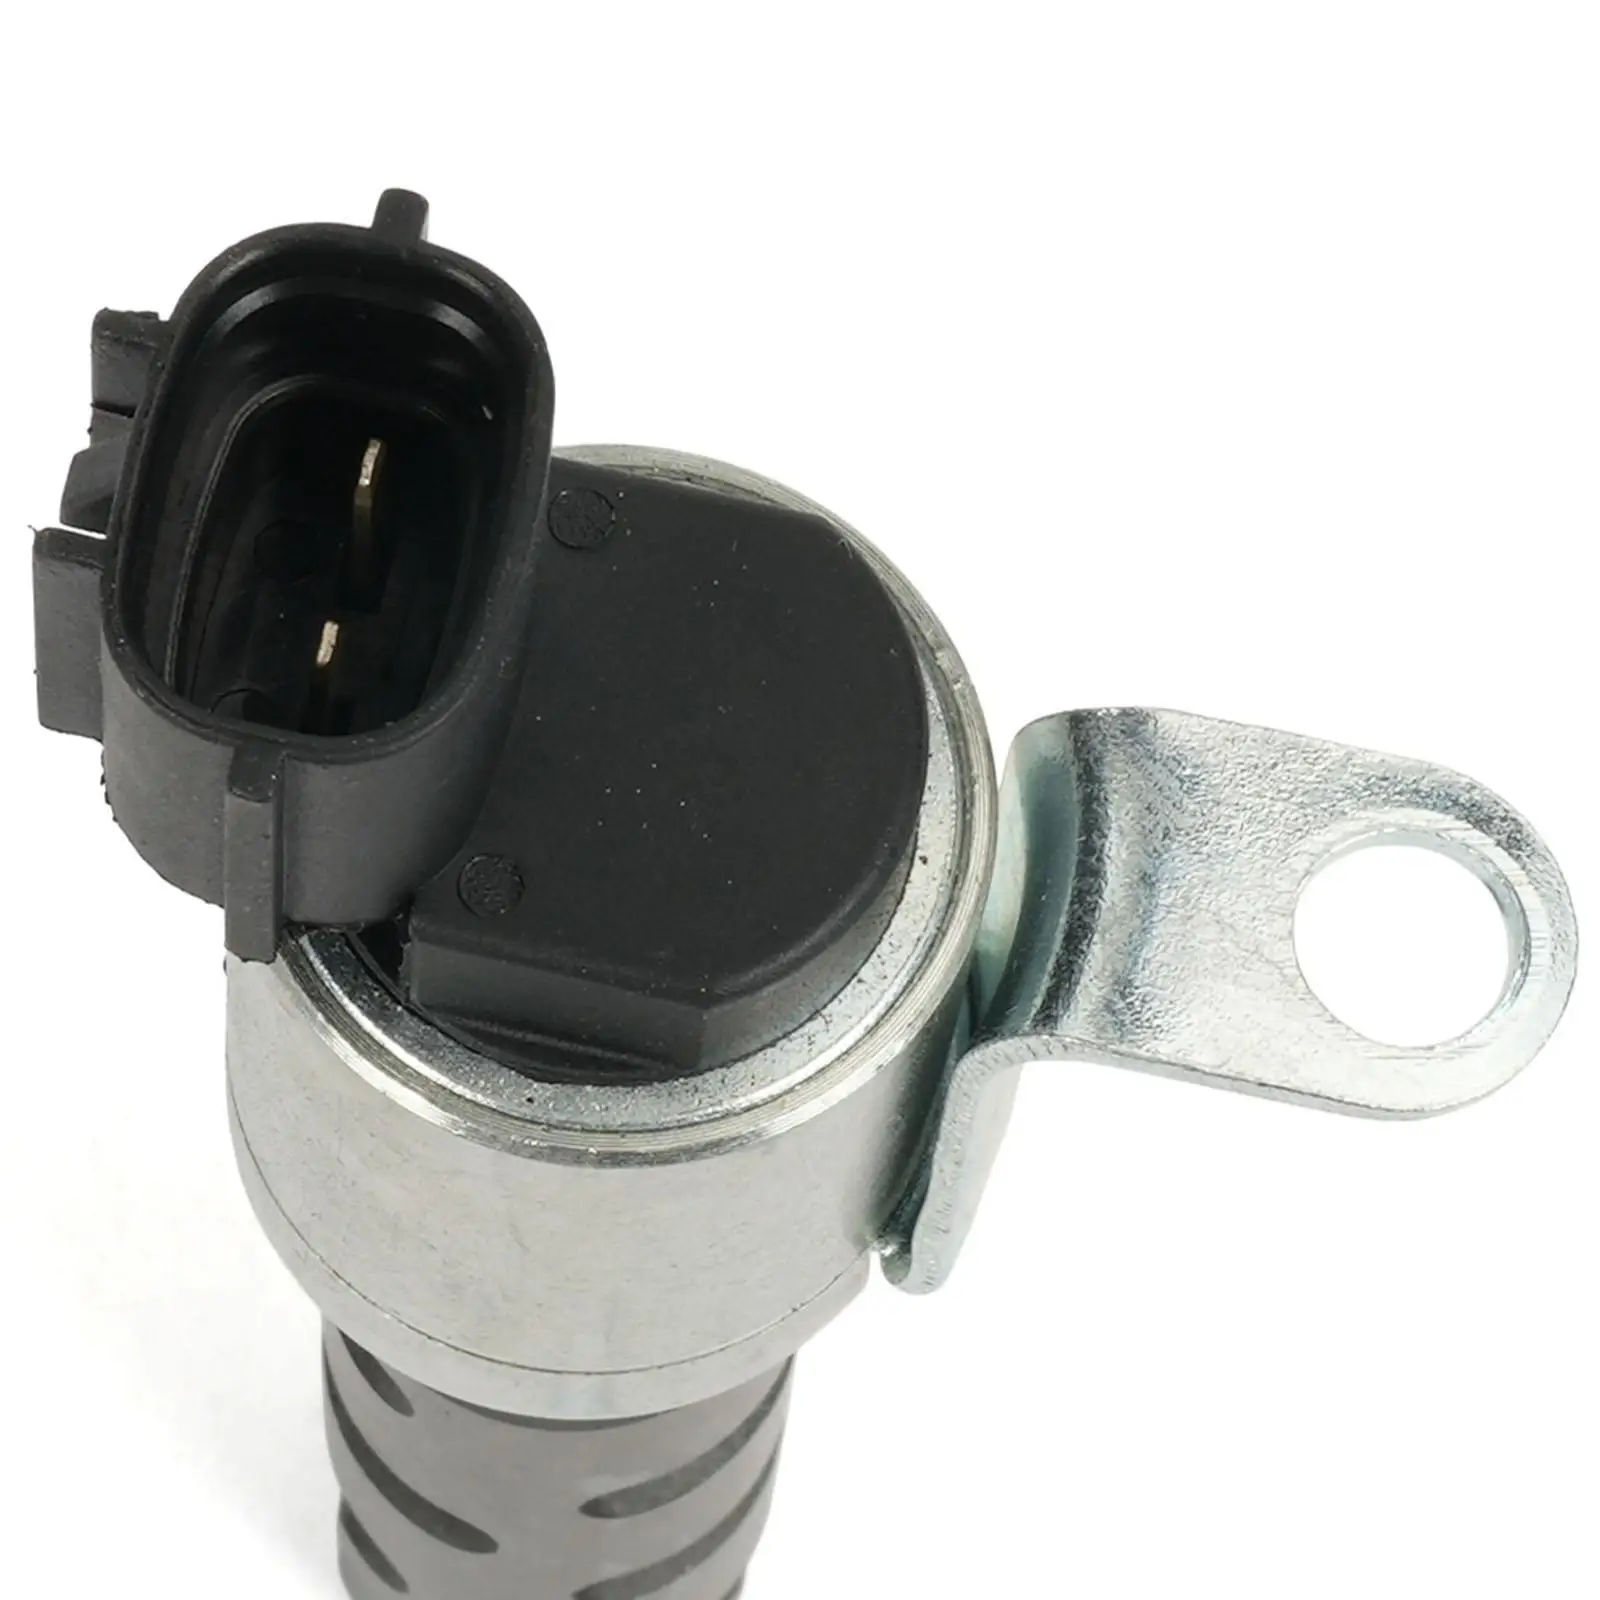 Replacement Oil Control Valve Sturdy for Toyota Corolla Replace Parts